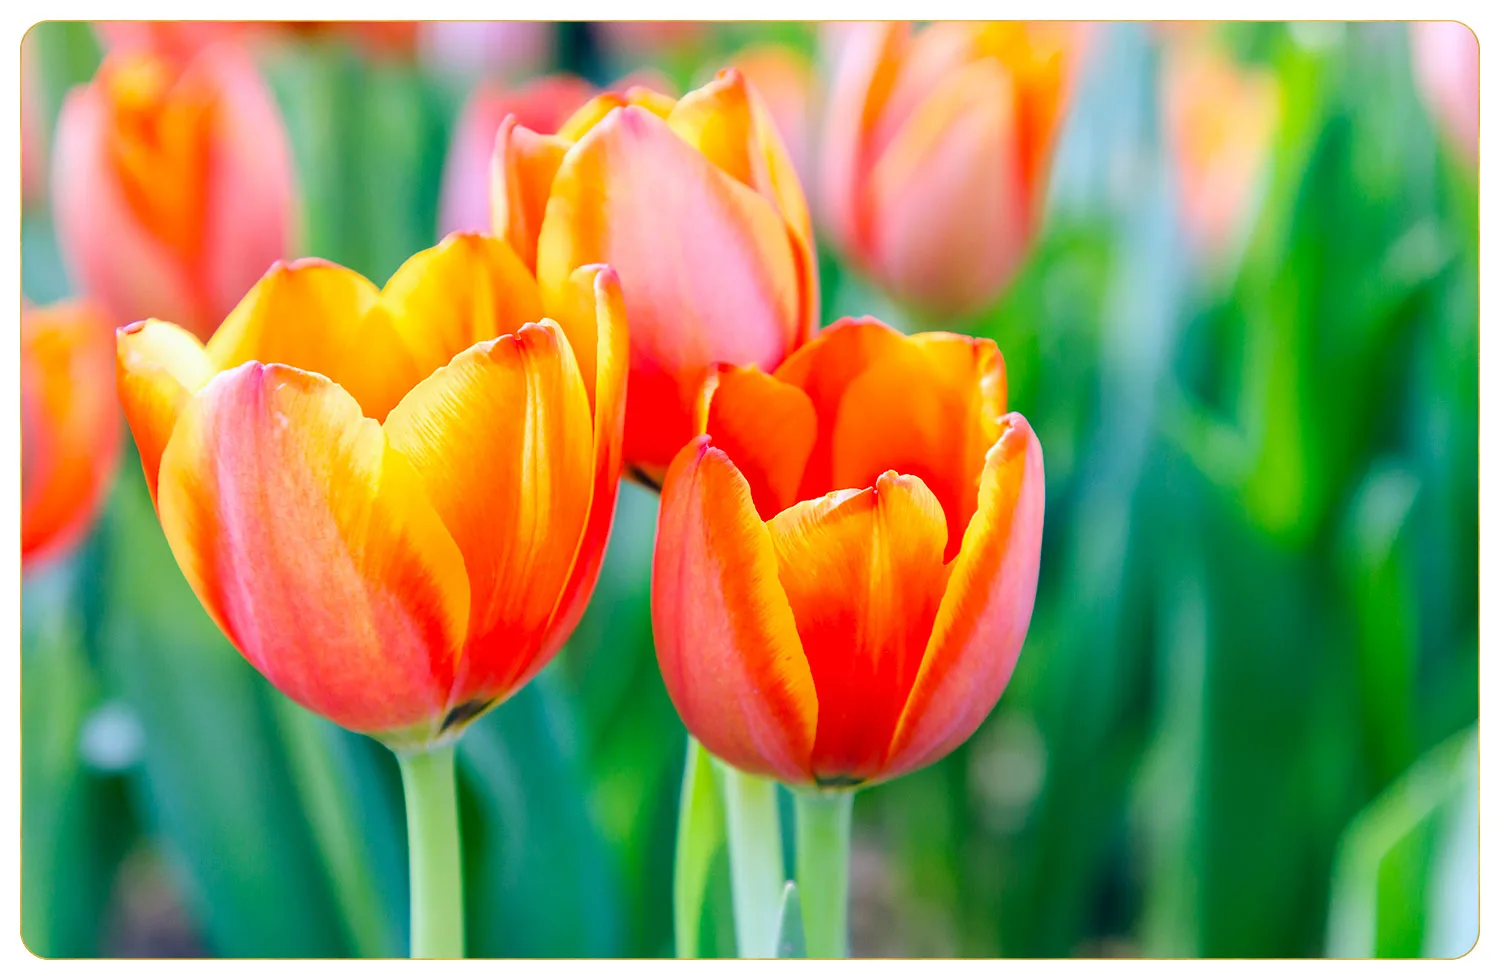 Tulip Care Guide: How to Care for Tulips + Growing Tips